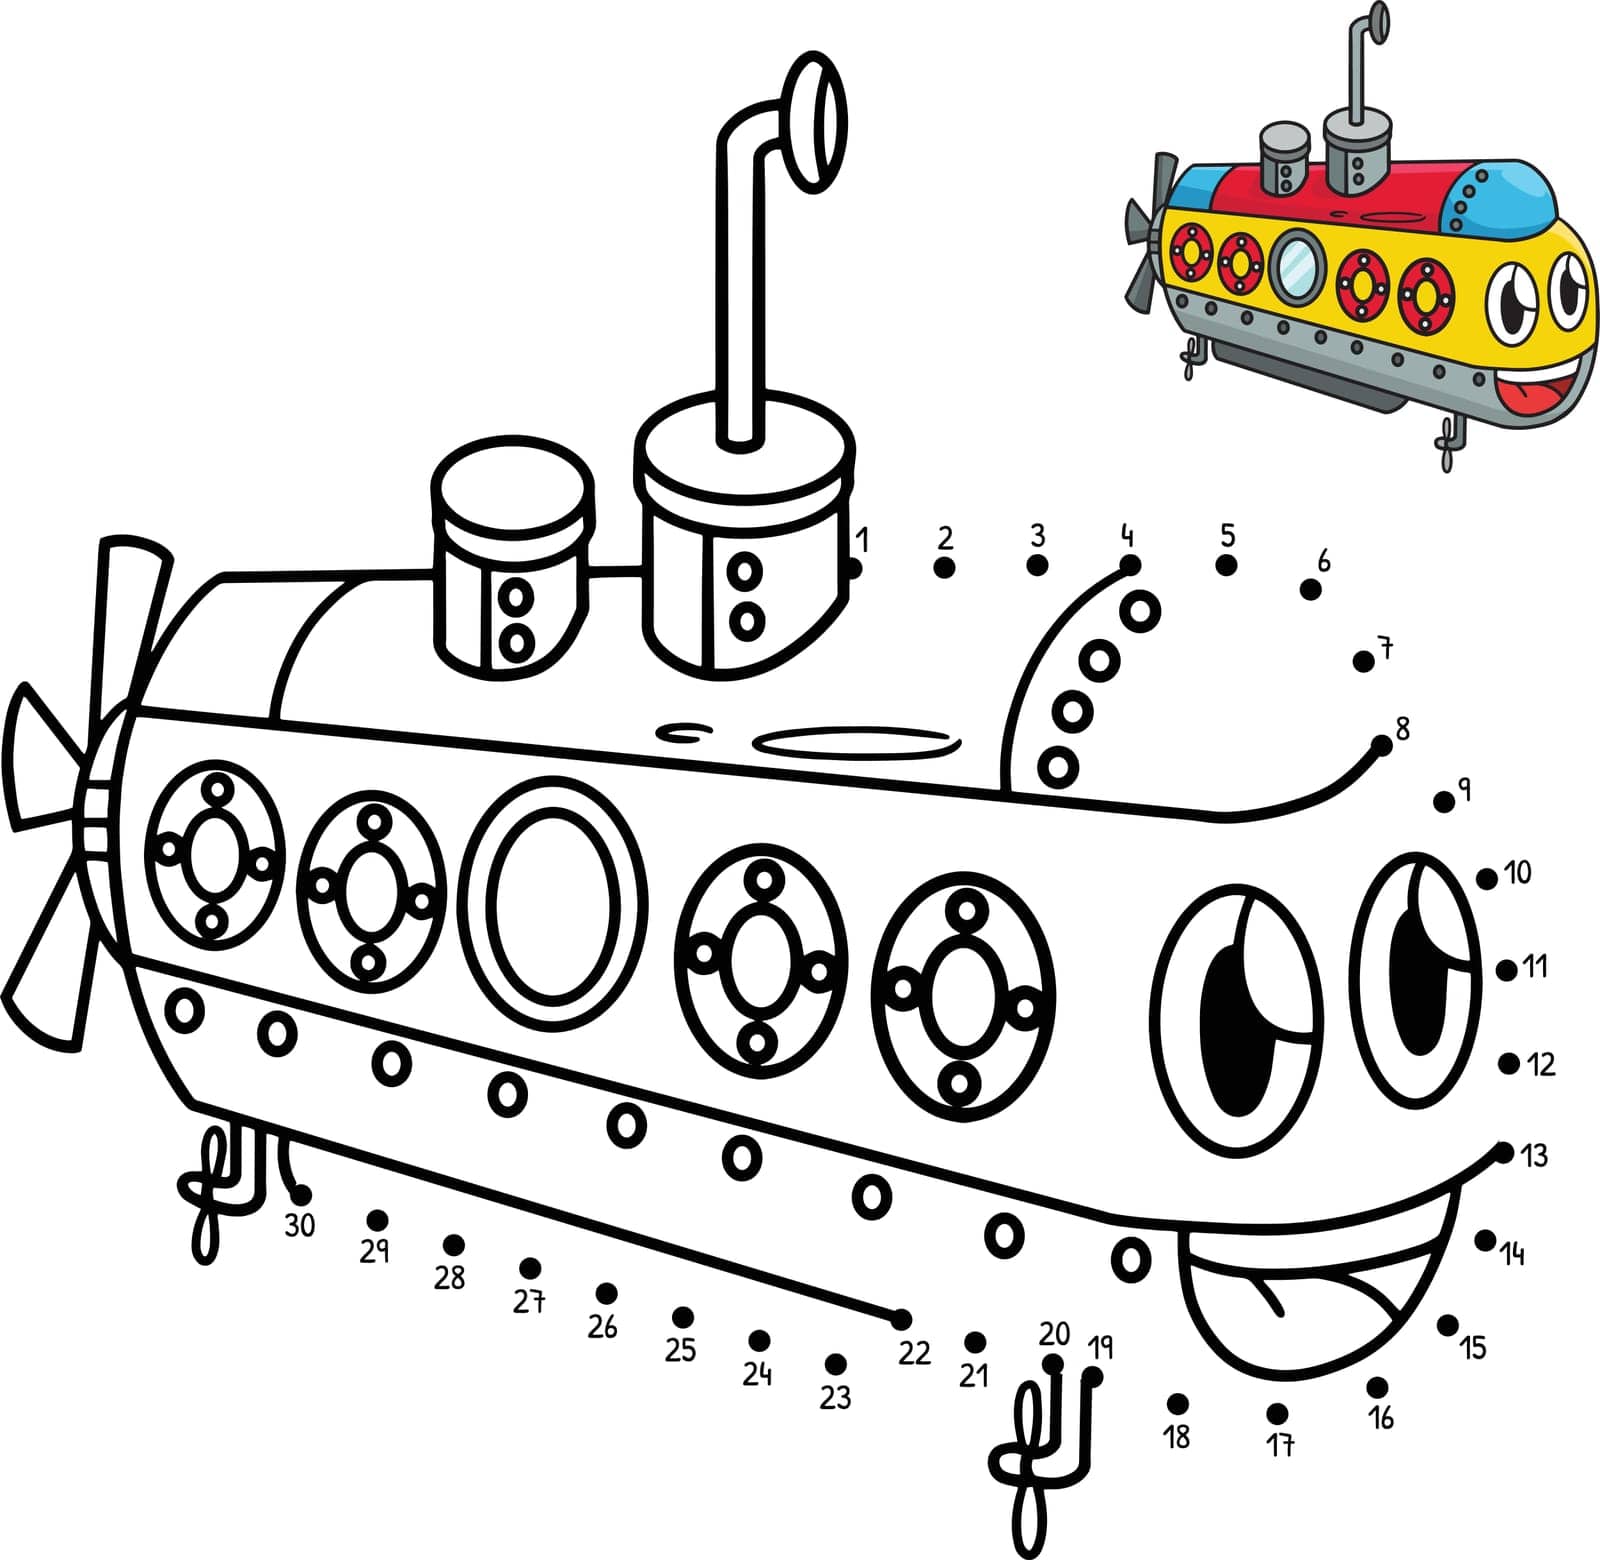 Dot to Dot Submarine Vehicle Isolated Coloring by abbydesign